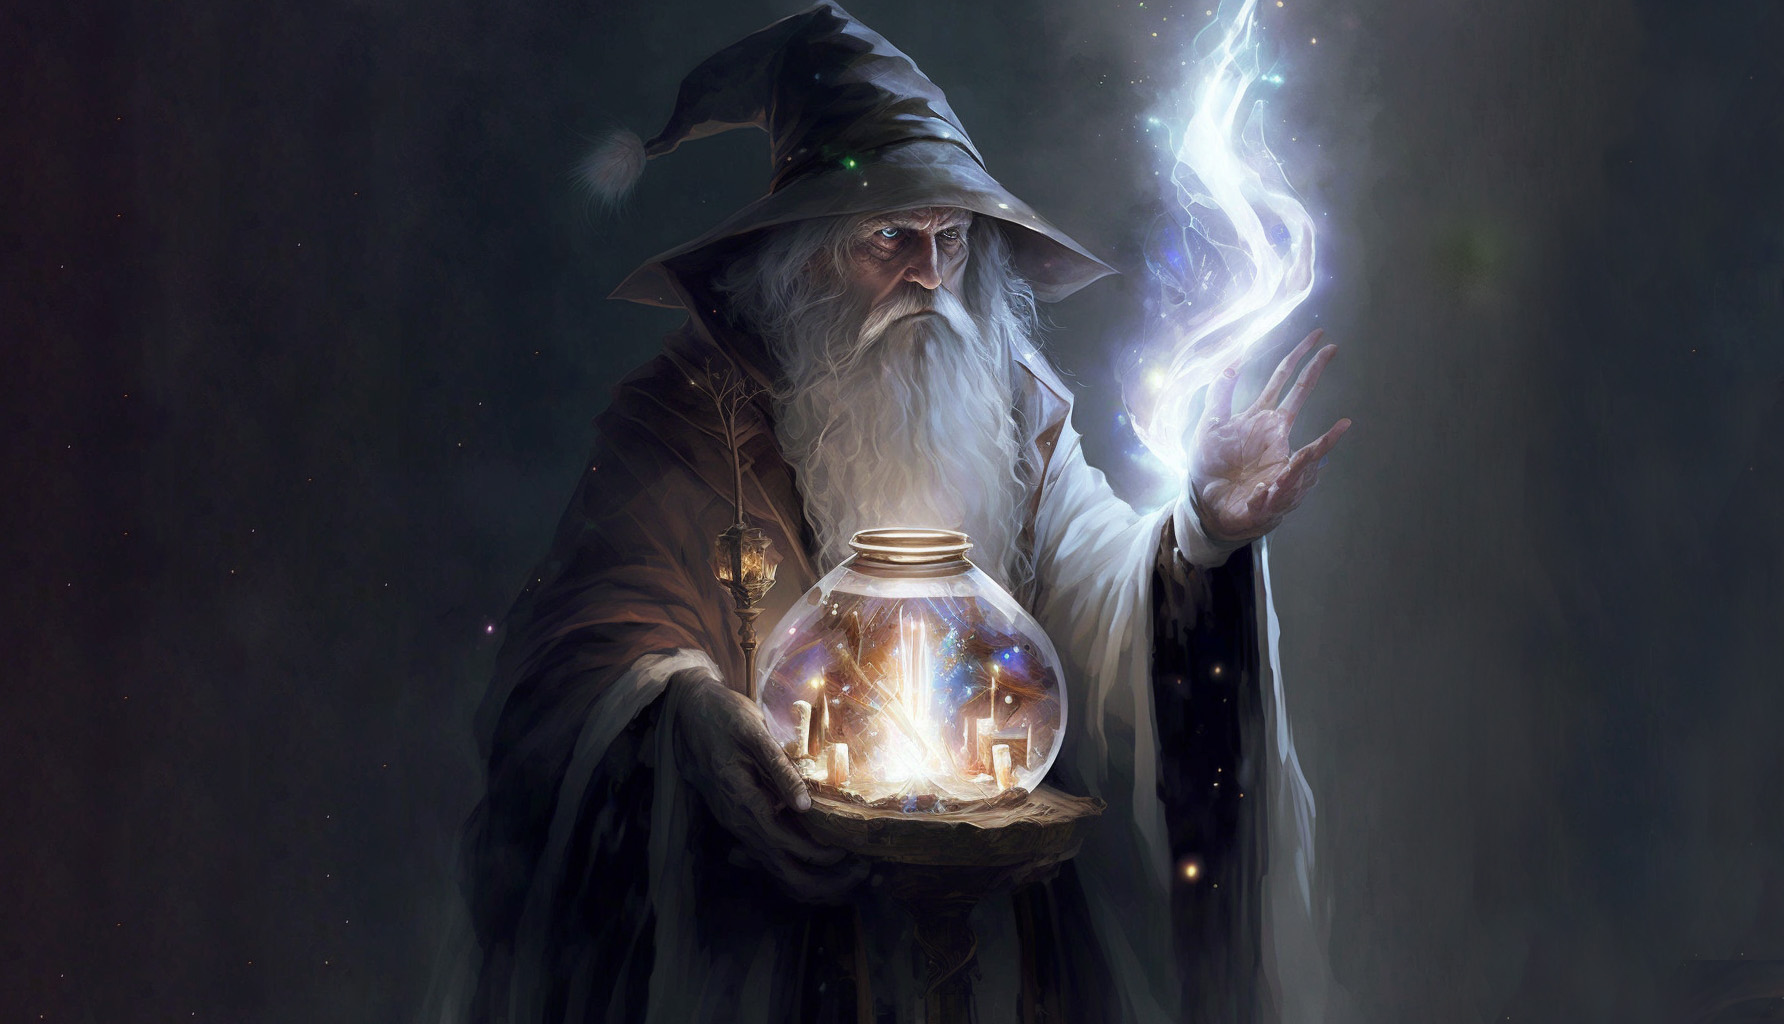 Elderly wizard in a thick robe and heavy wizard hat practicing magic